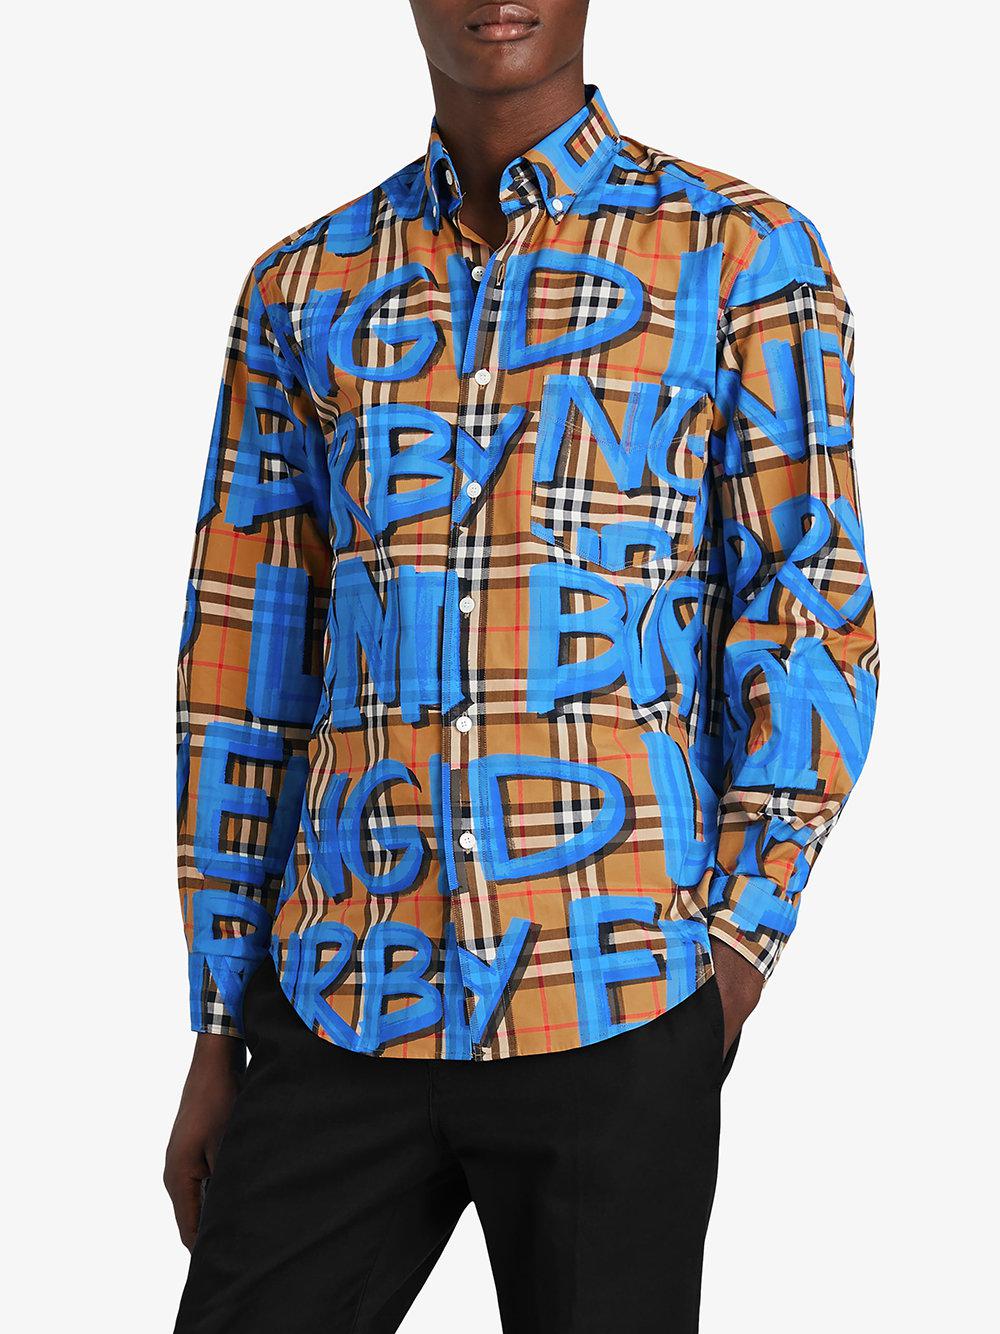 Burberry Graffiti Print Vintage Check Shirt in Blue for Men | Lyst Canada